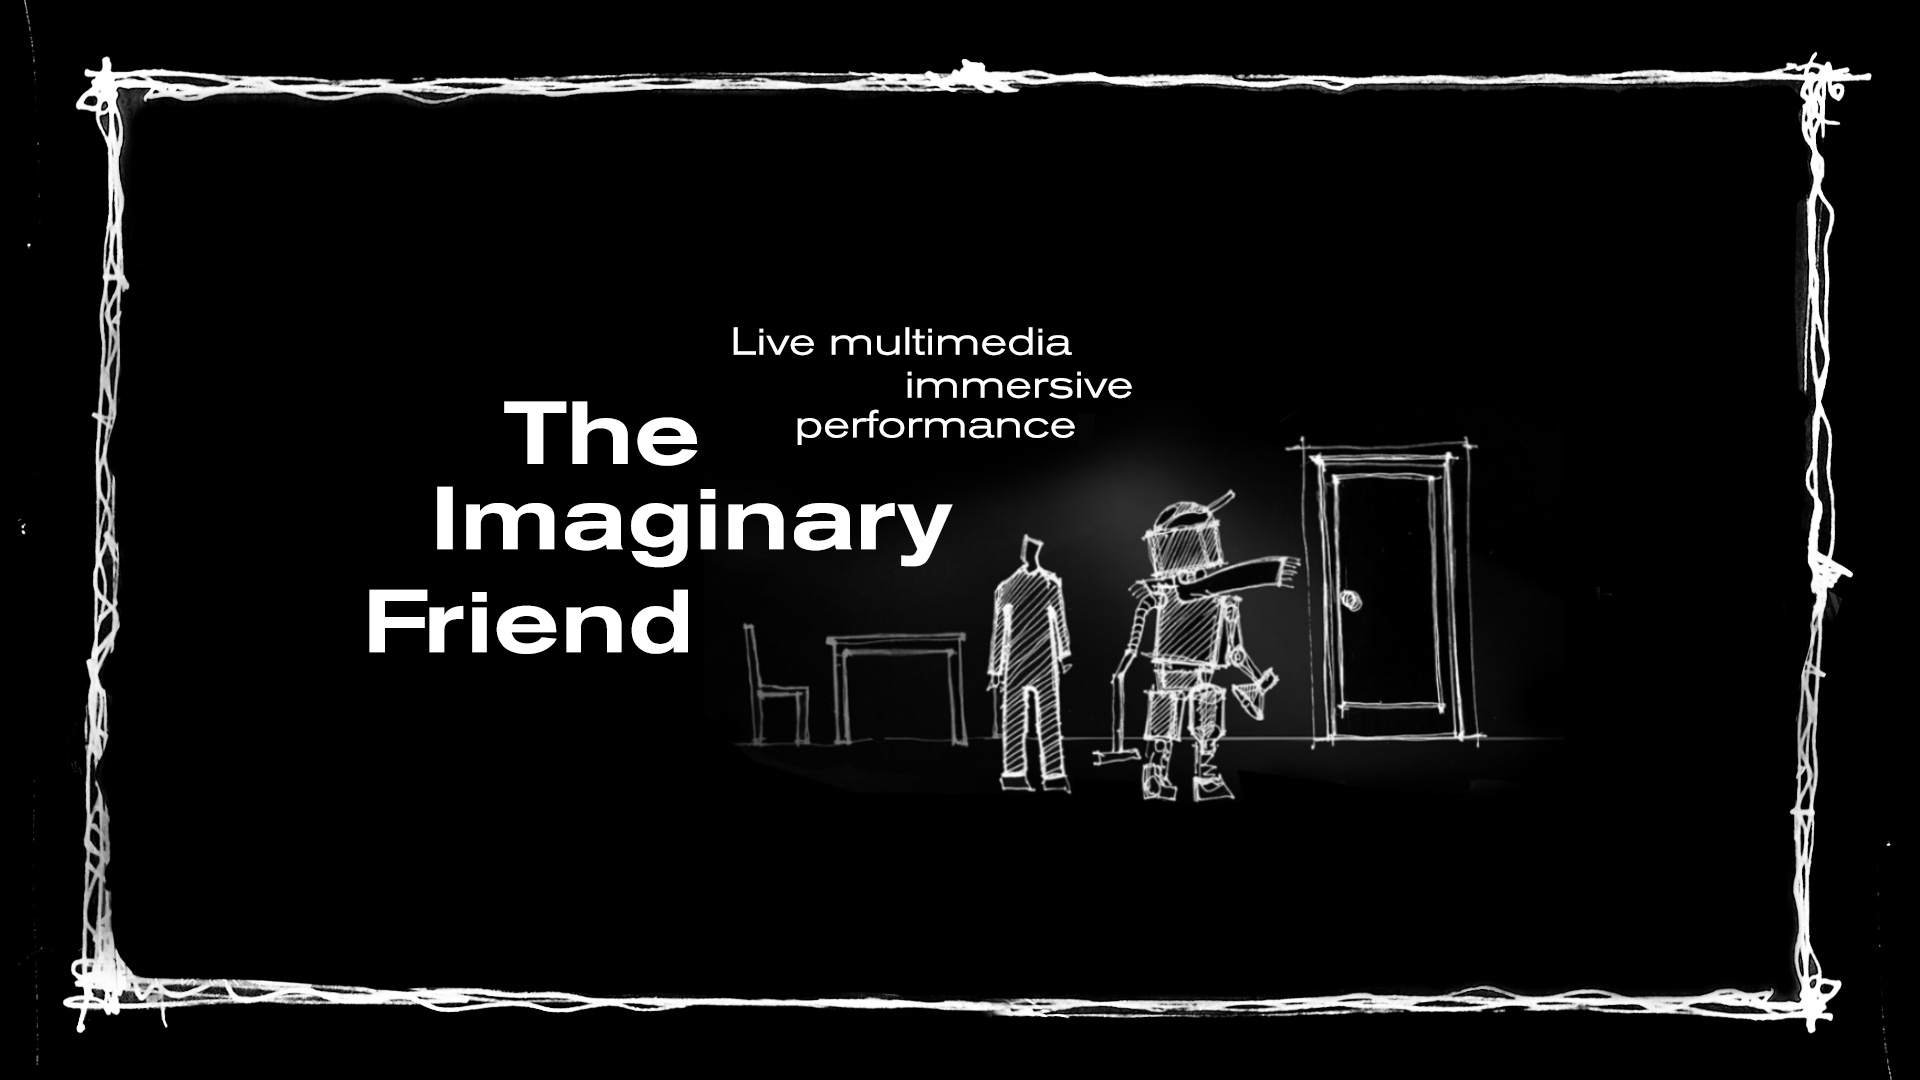 Live multimedia immersive performance The Imaginary Friend_6